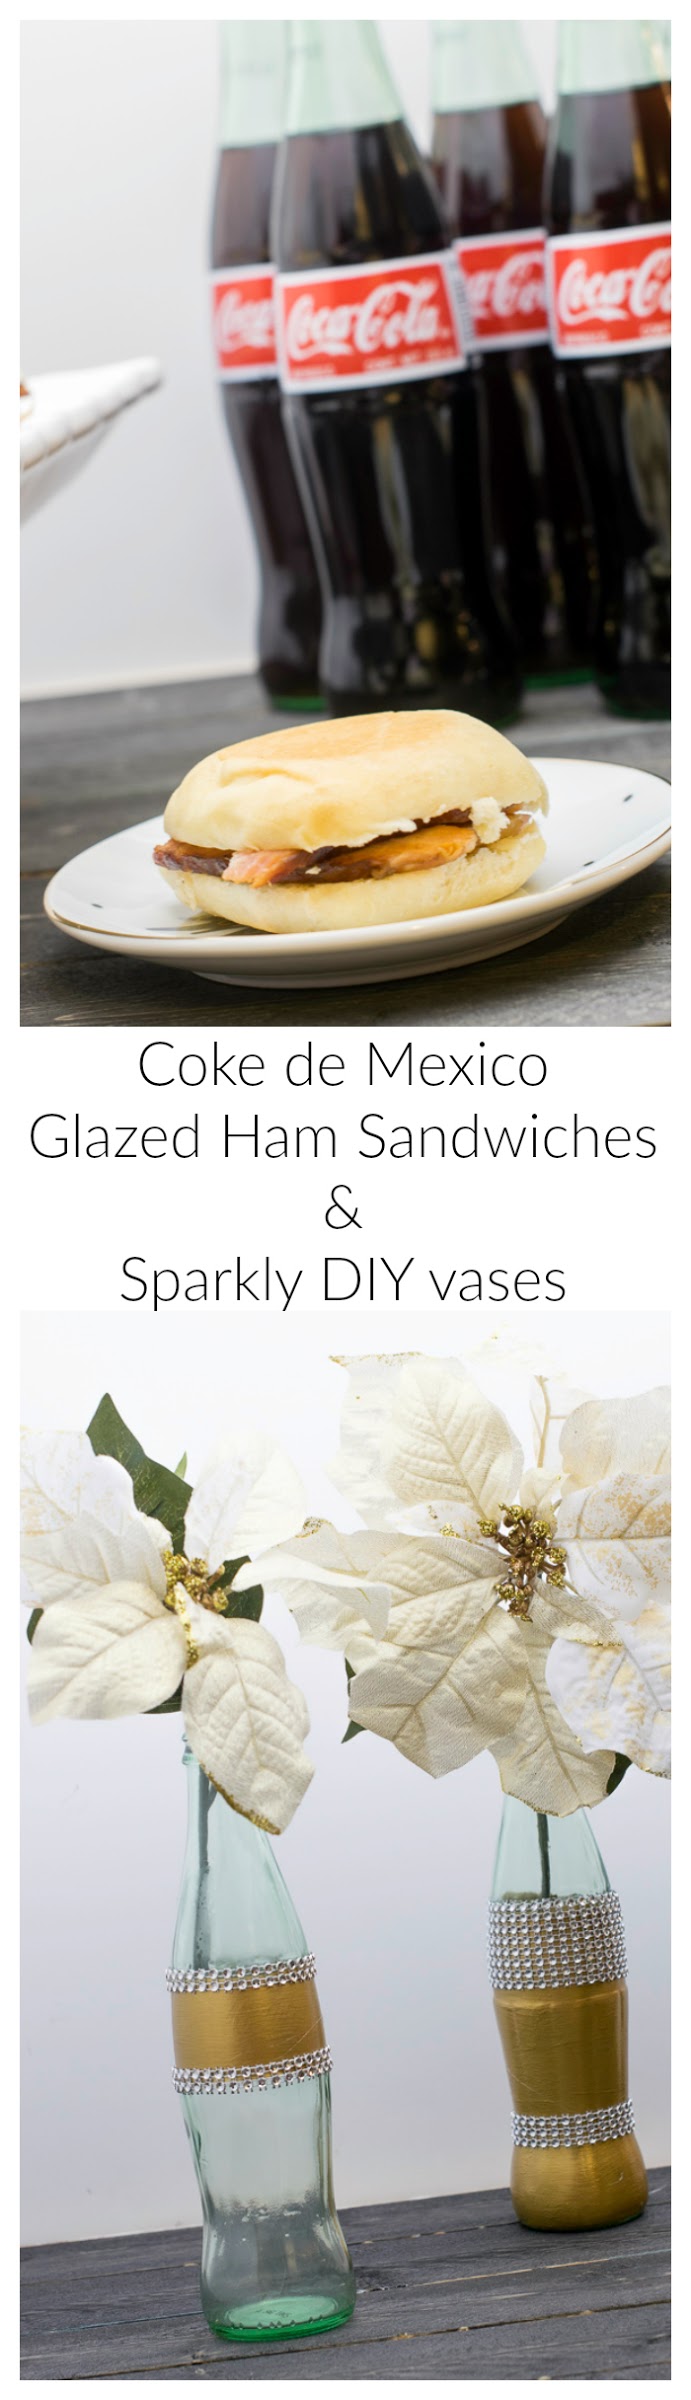 Coke De Mexico glazed ham sandwiches and sparkly diy vases. Coke de Mexico Glazed ham sandwiches for holiday entertaining. Learn how to decorate the glass bottles with gold paint and rhinestones for a stunning display. #ShareHolidayJoy #CollectiveBias